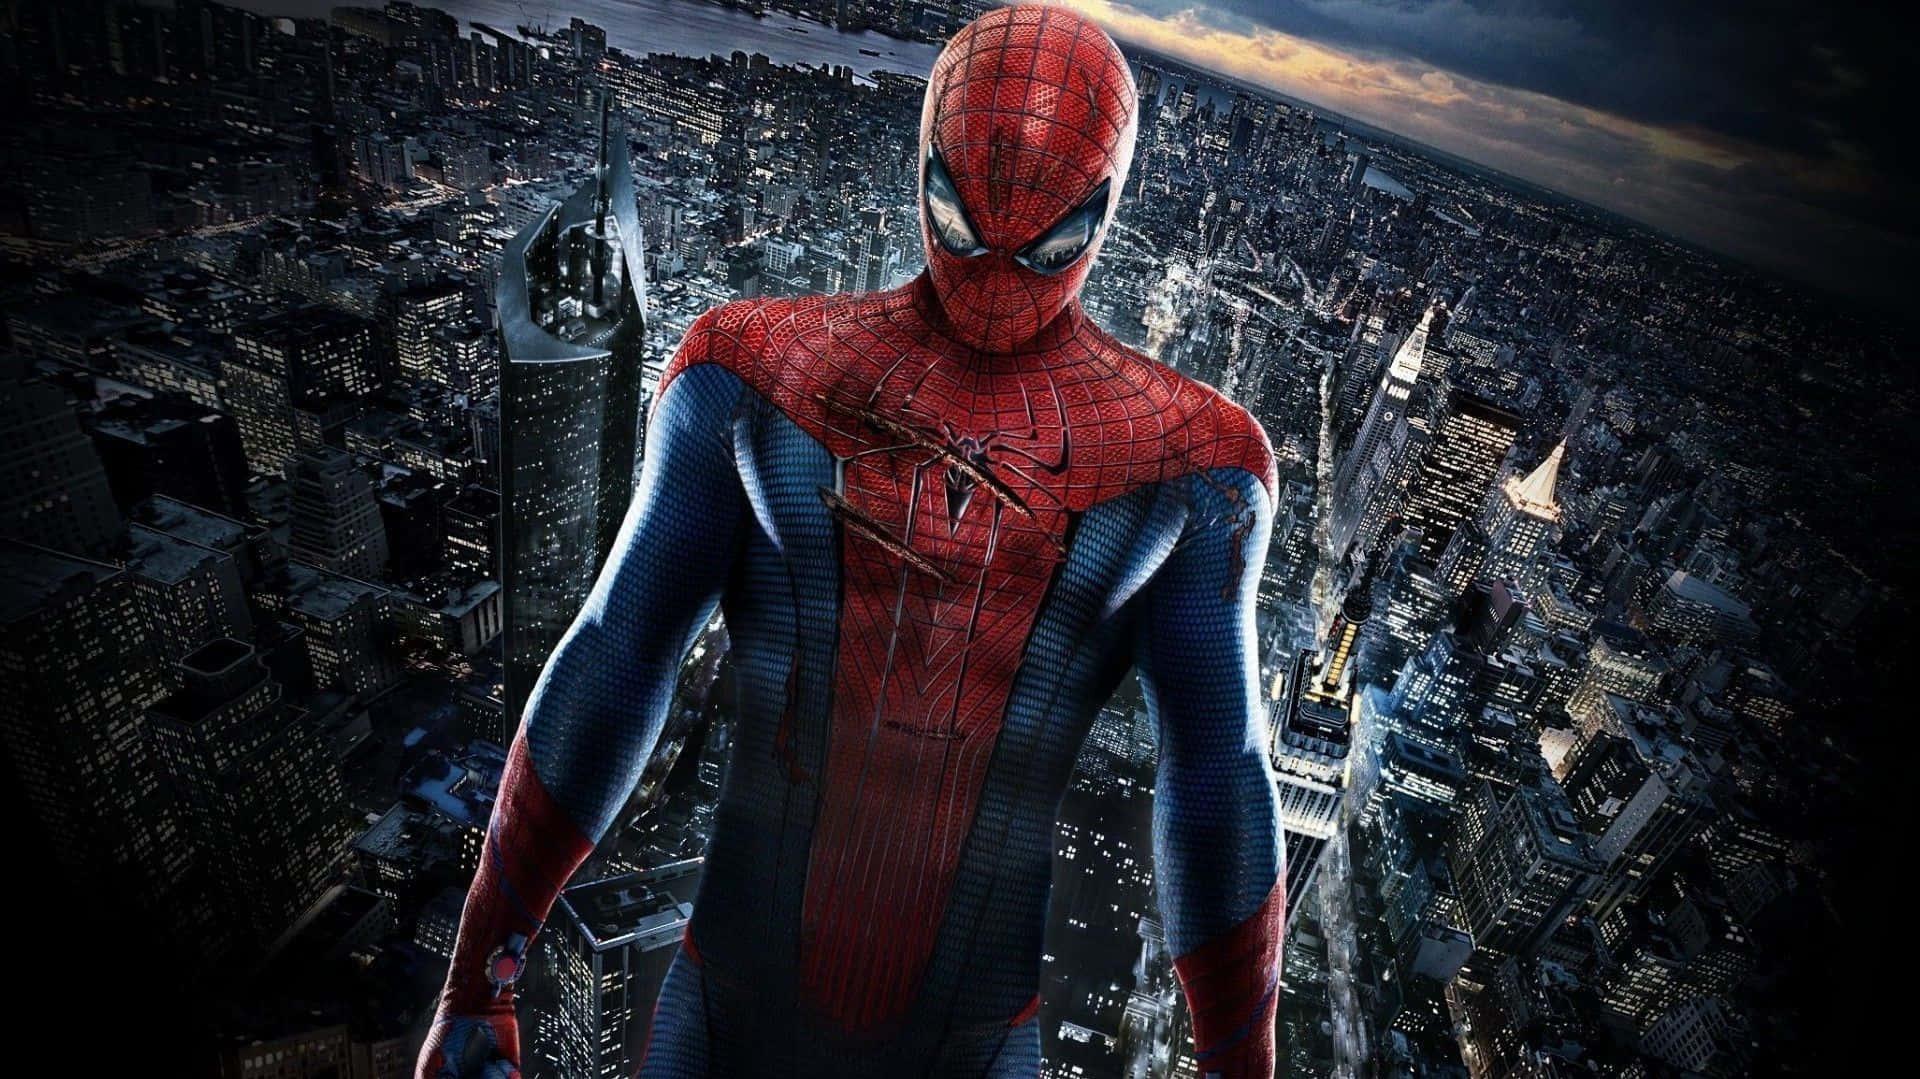 The Best Spider Man With Superhero Powers Wallpaper